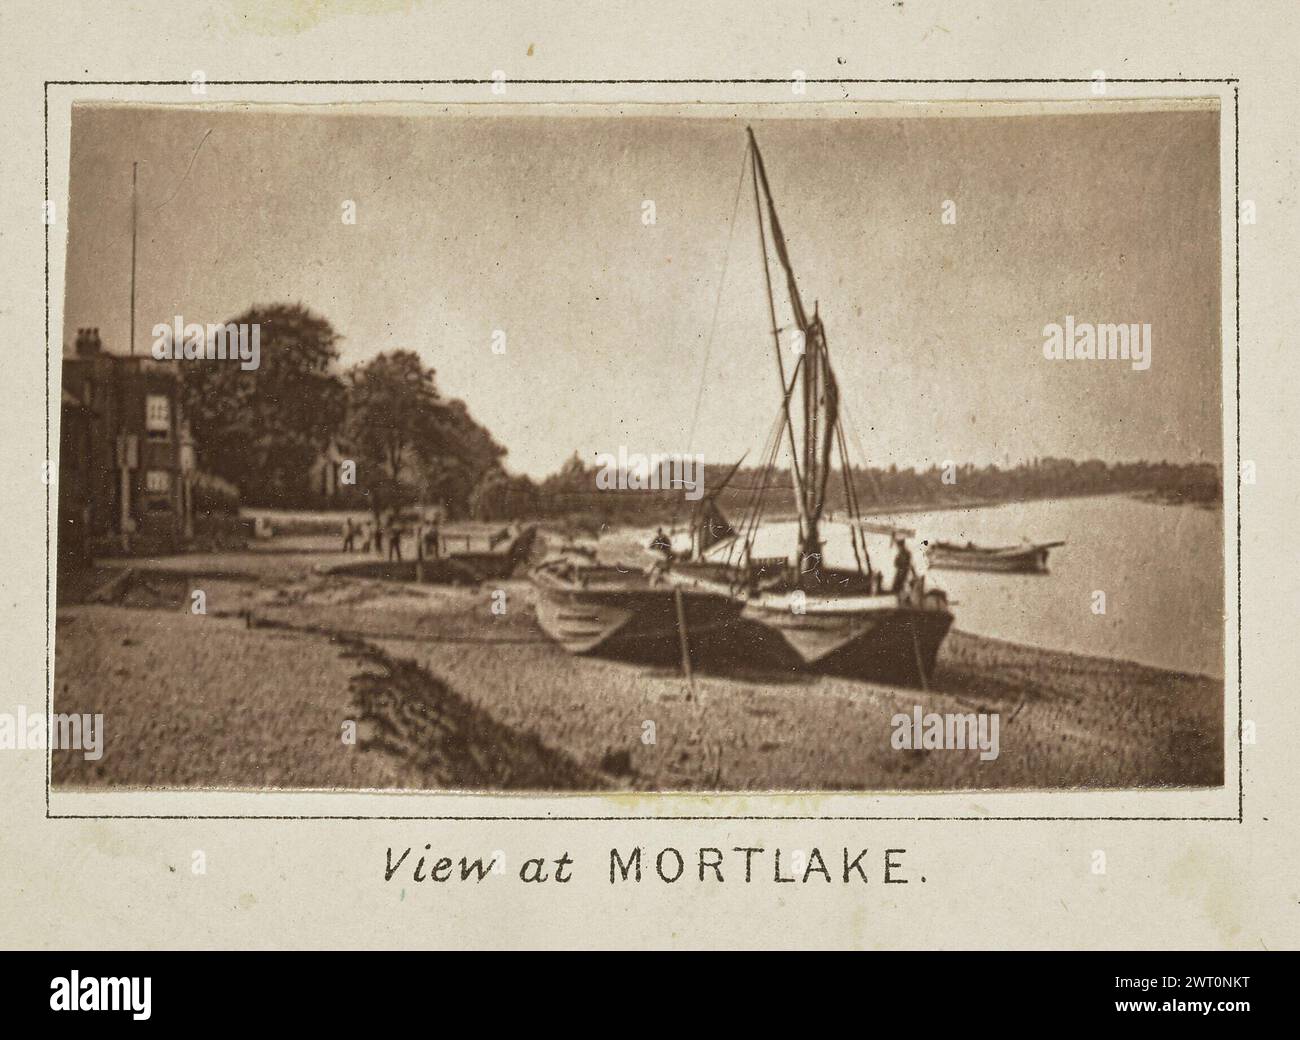 View at Mortlake. Henry W. Taunt, photographer (British, 1842 - 1922) about 1886 One of three tipped-in photographs illustrating a printed map of Richmond along the River Thames. The photograph shows a view of two boats on the bank of the river at Mortlake with others floating in the water. Several people can be seen scattered in the background and in the boats. (Recto, mount) lower center, below image, printed in black ink: 'View at [italicized] MORTLAKE.' Stock Photo